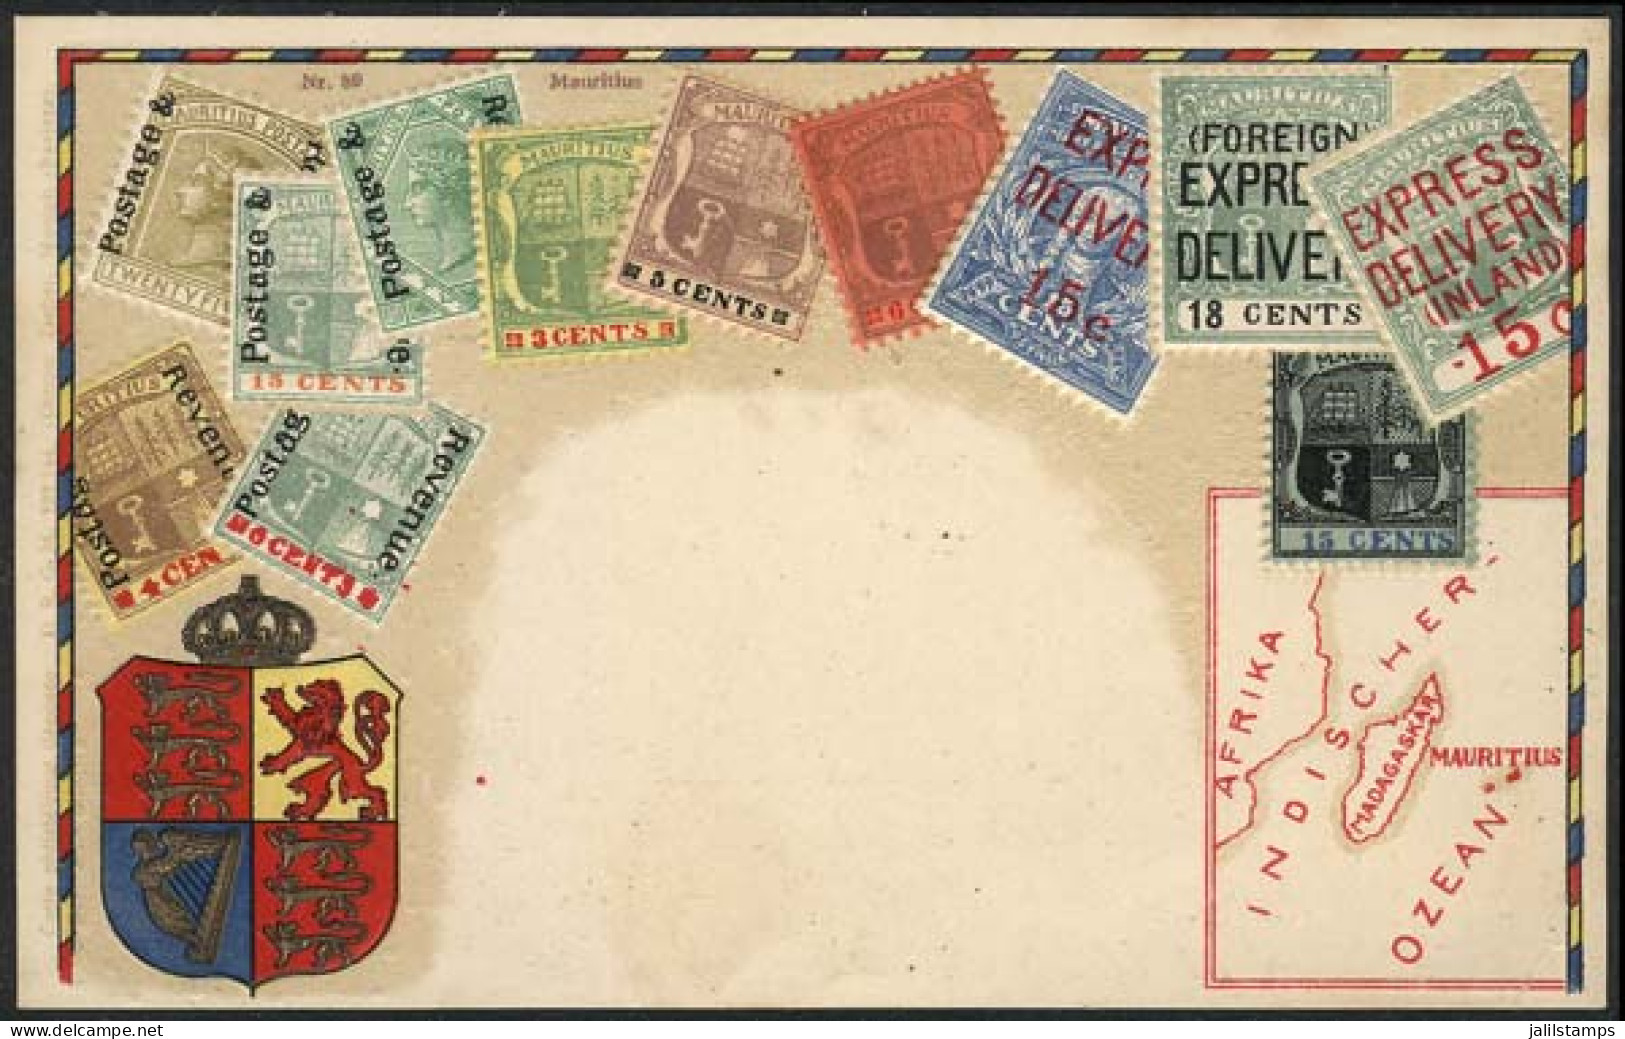 MAURITIUS: Old PC Illustrated With View Of Postage Stamps, Map And Coat Of Arms, VF Quality! - Mauricio